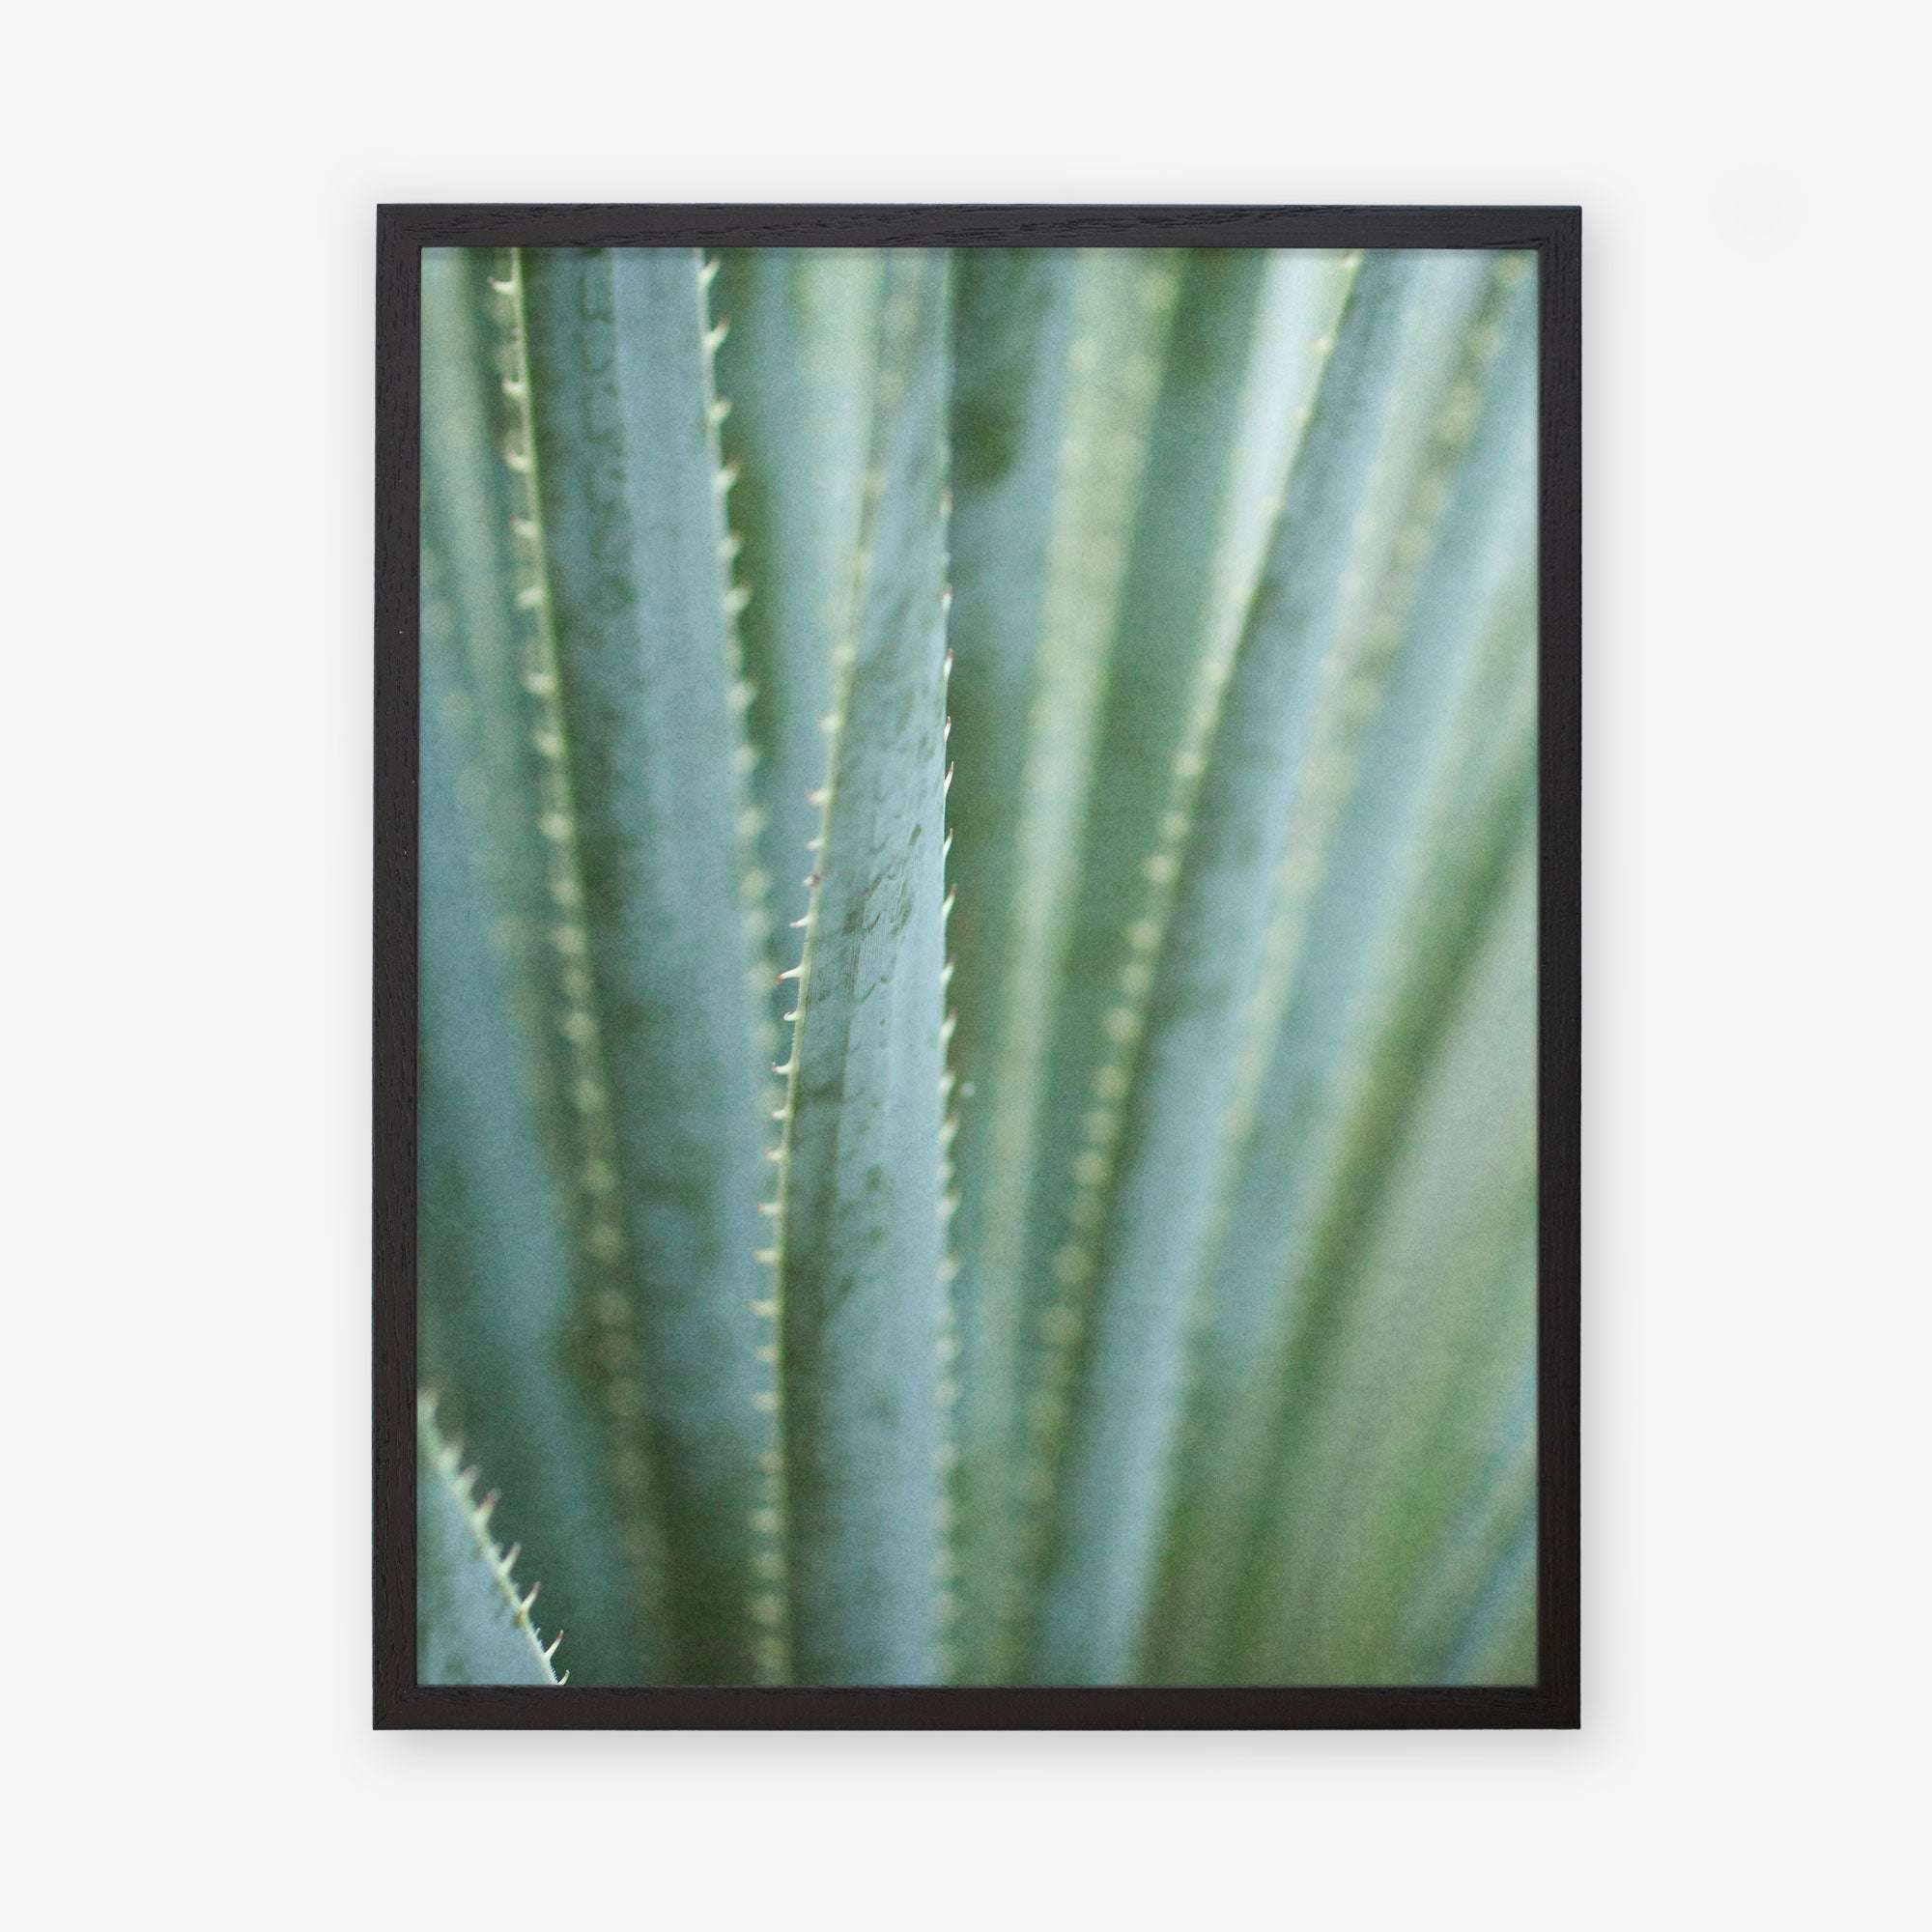 A close-up photograph of aloe vera leaves, showing their green color and spiky edges, printed on archival photographic paper against a white wall featuring the Green Botanical Print &#39;Strands and Spikes II&#39; by Offley Green.